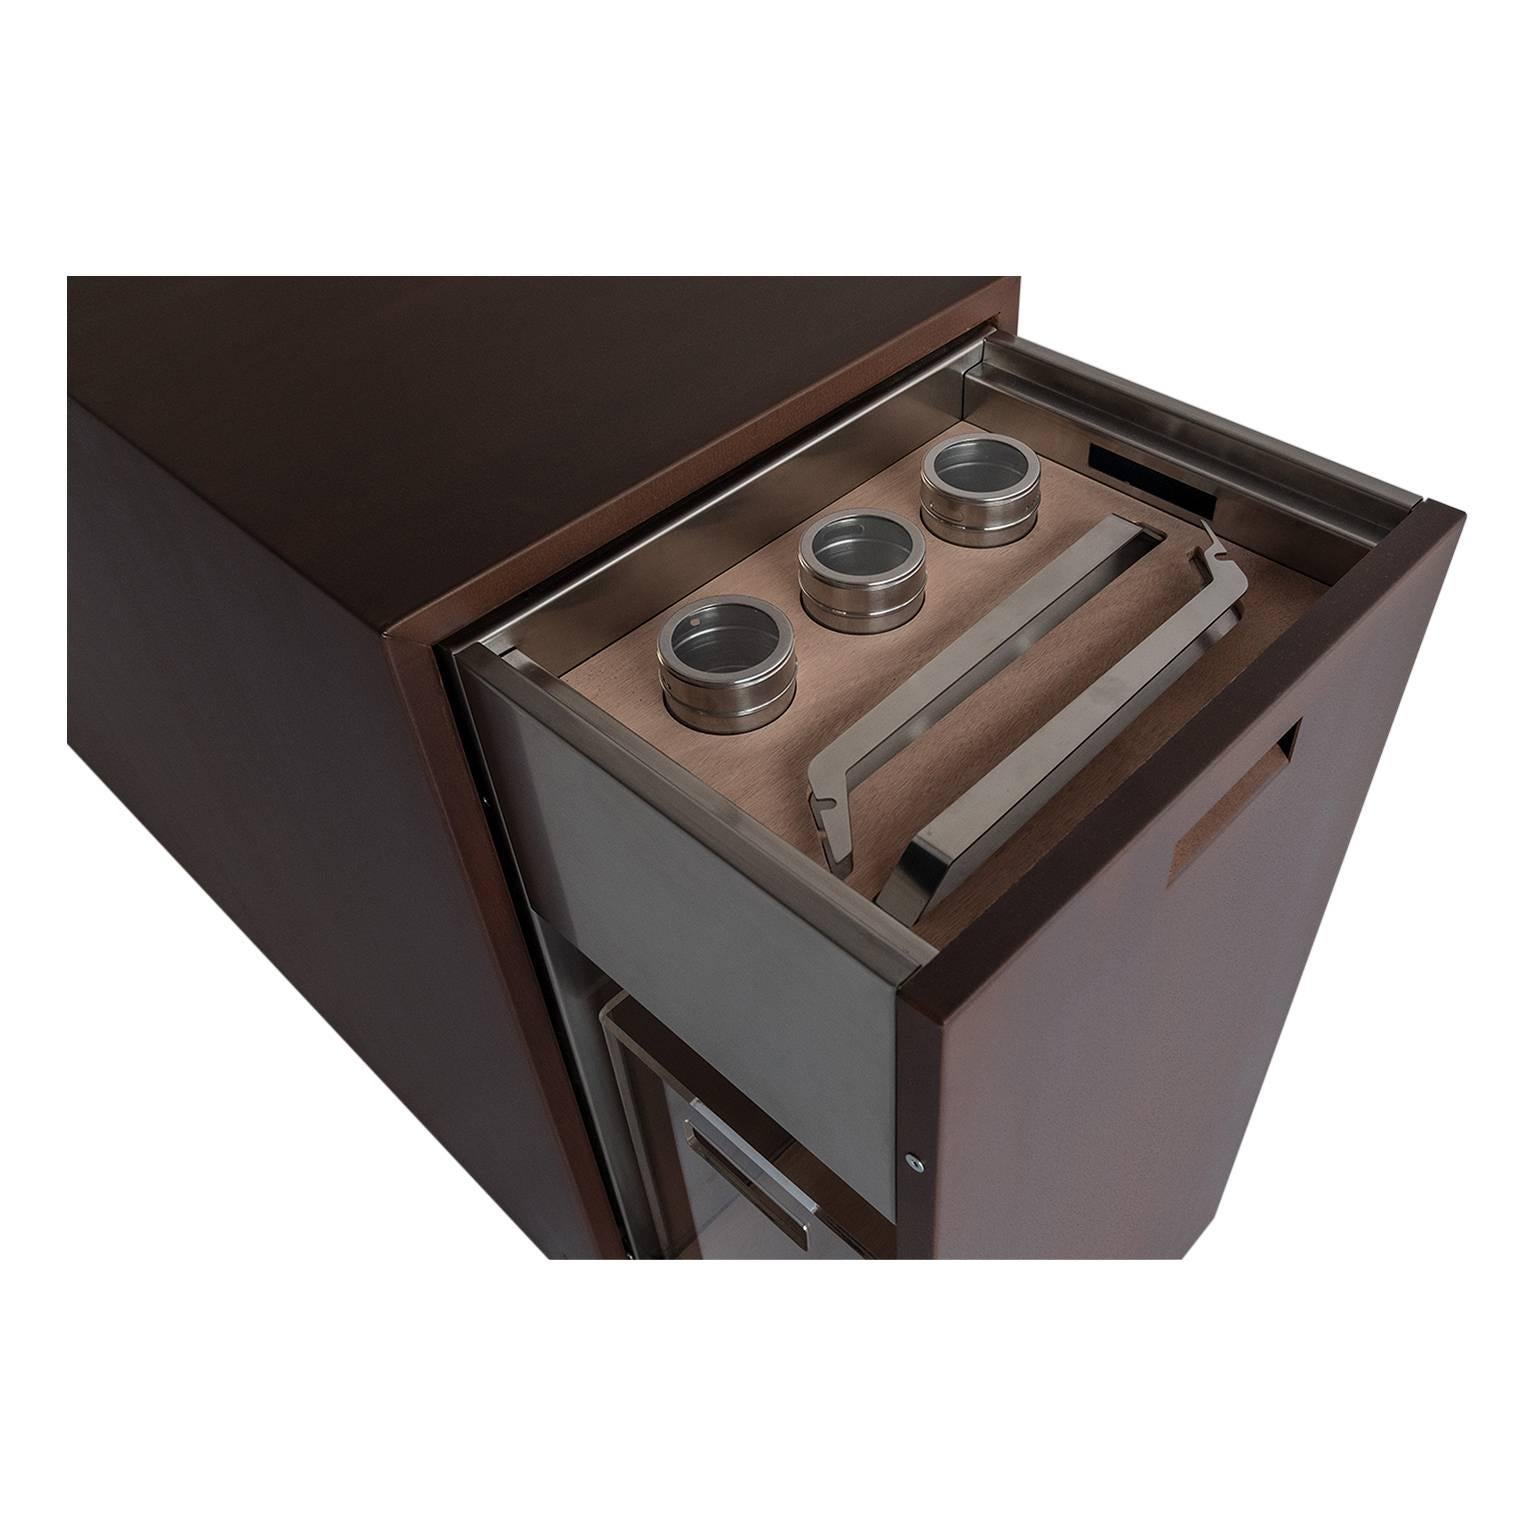 Elegant Corten Outdoor Charcoal Barbecue with Shelves and Cupboards, Snail (Gebürstet) im Angebot